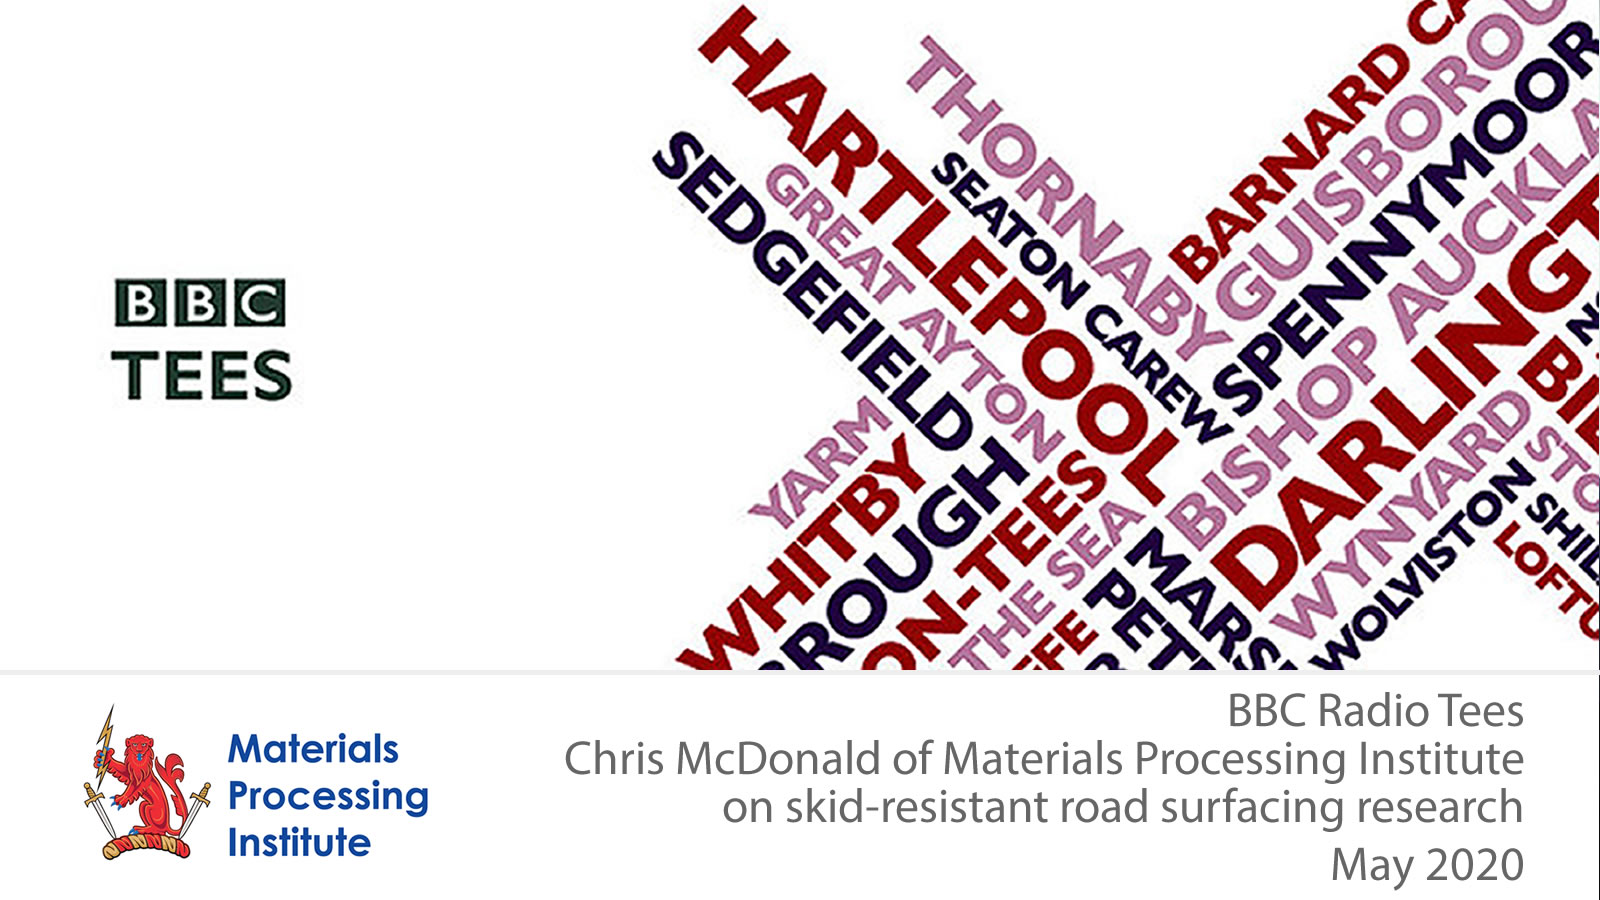 Chris McDonald of Materials Processing Institute on Skid-resistant Road Surfacing Research - May 2020